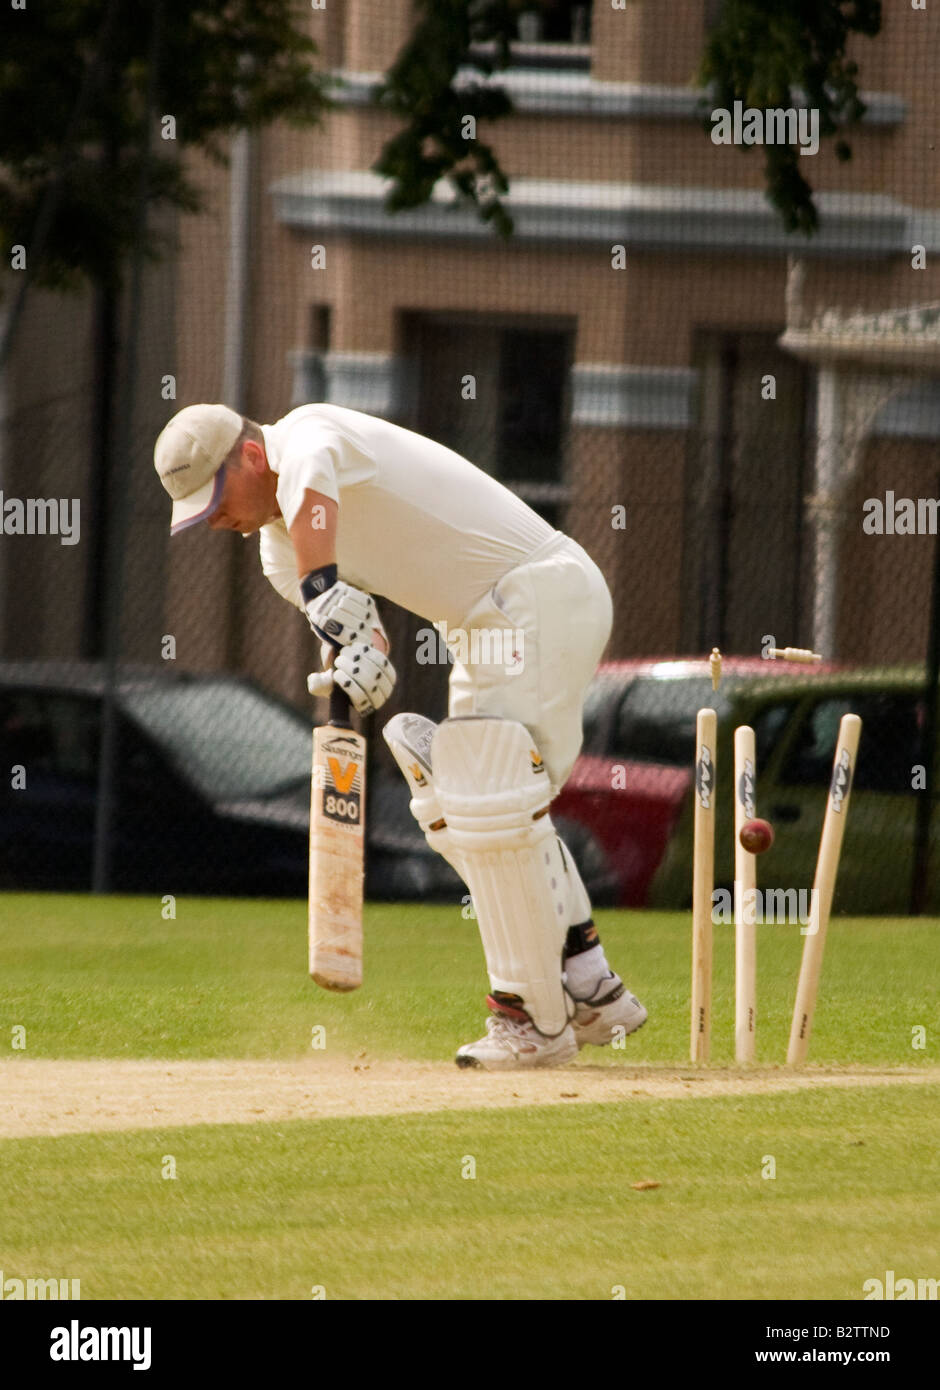 A batsman is cleanly bowled out with the stumps flying from the wicket Stock Photo